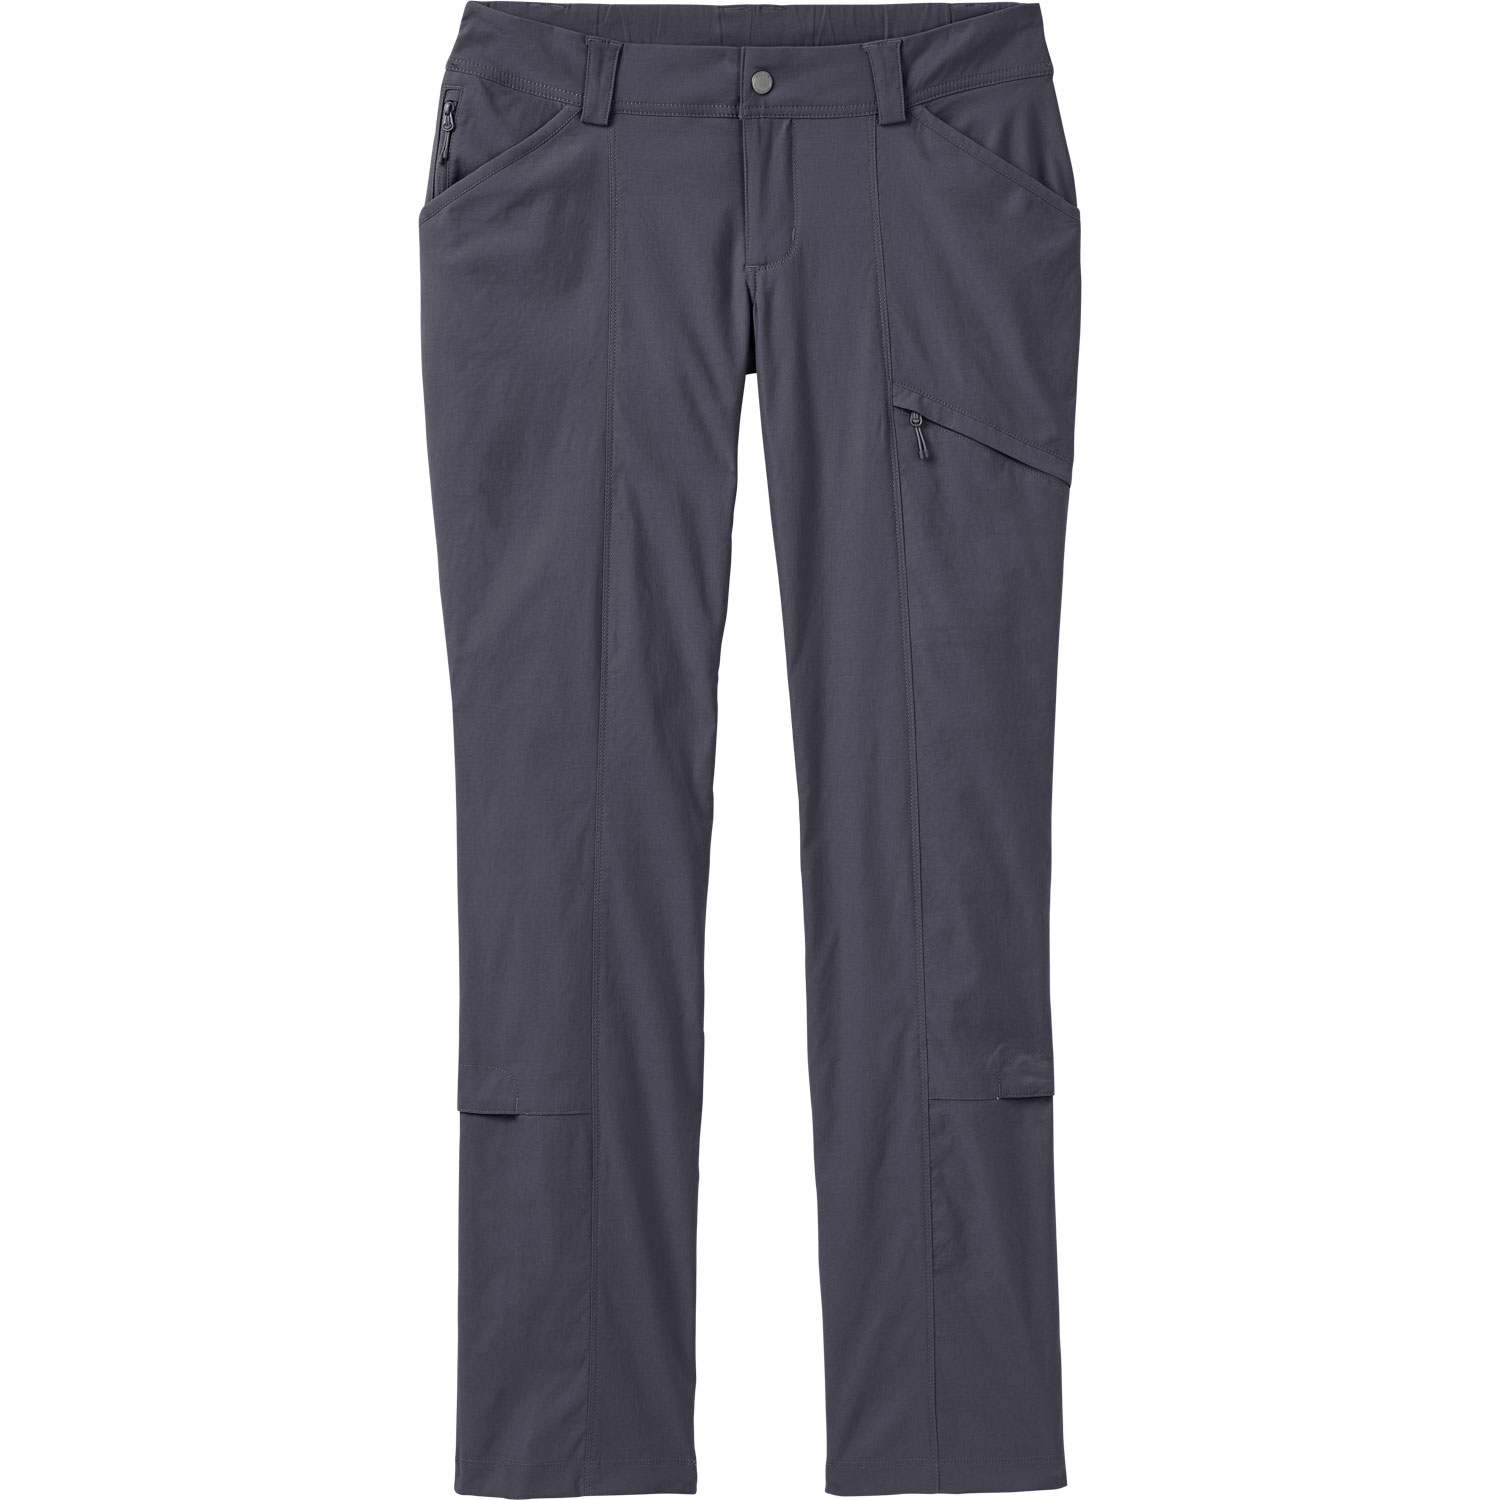 Women's Dry on the Fly Slim Leg Pants | Duluth Trading Company